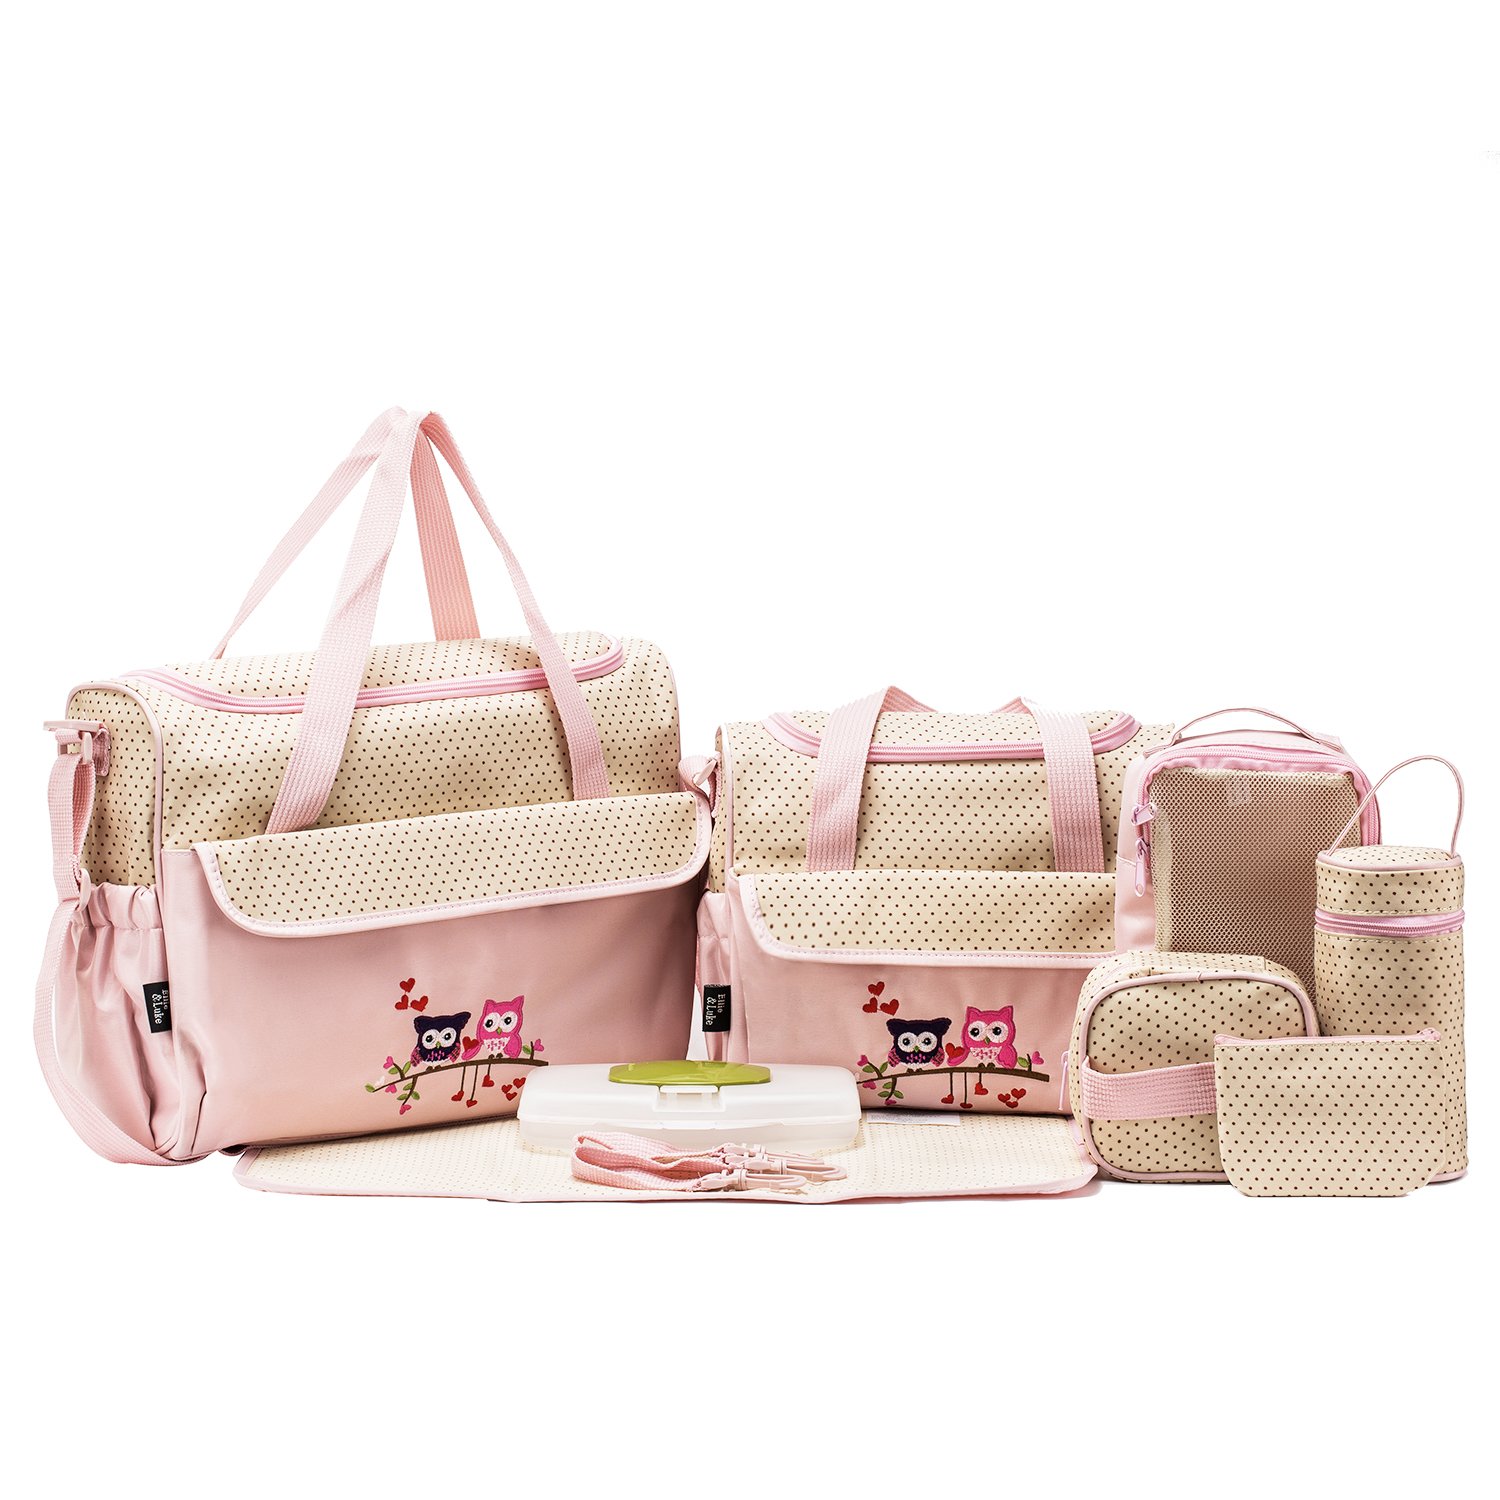 Animals Diaper Tote Bag 10pc, Pink Owls